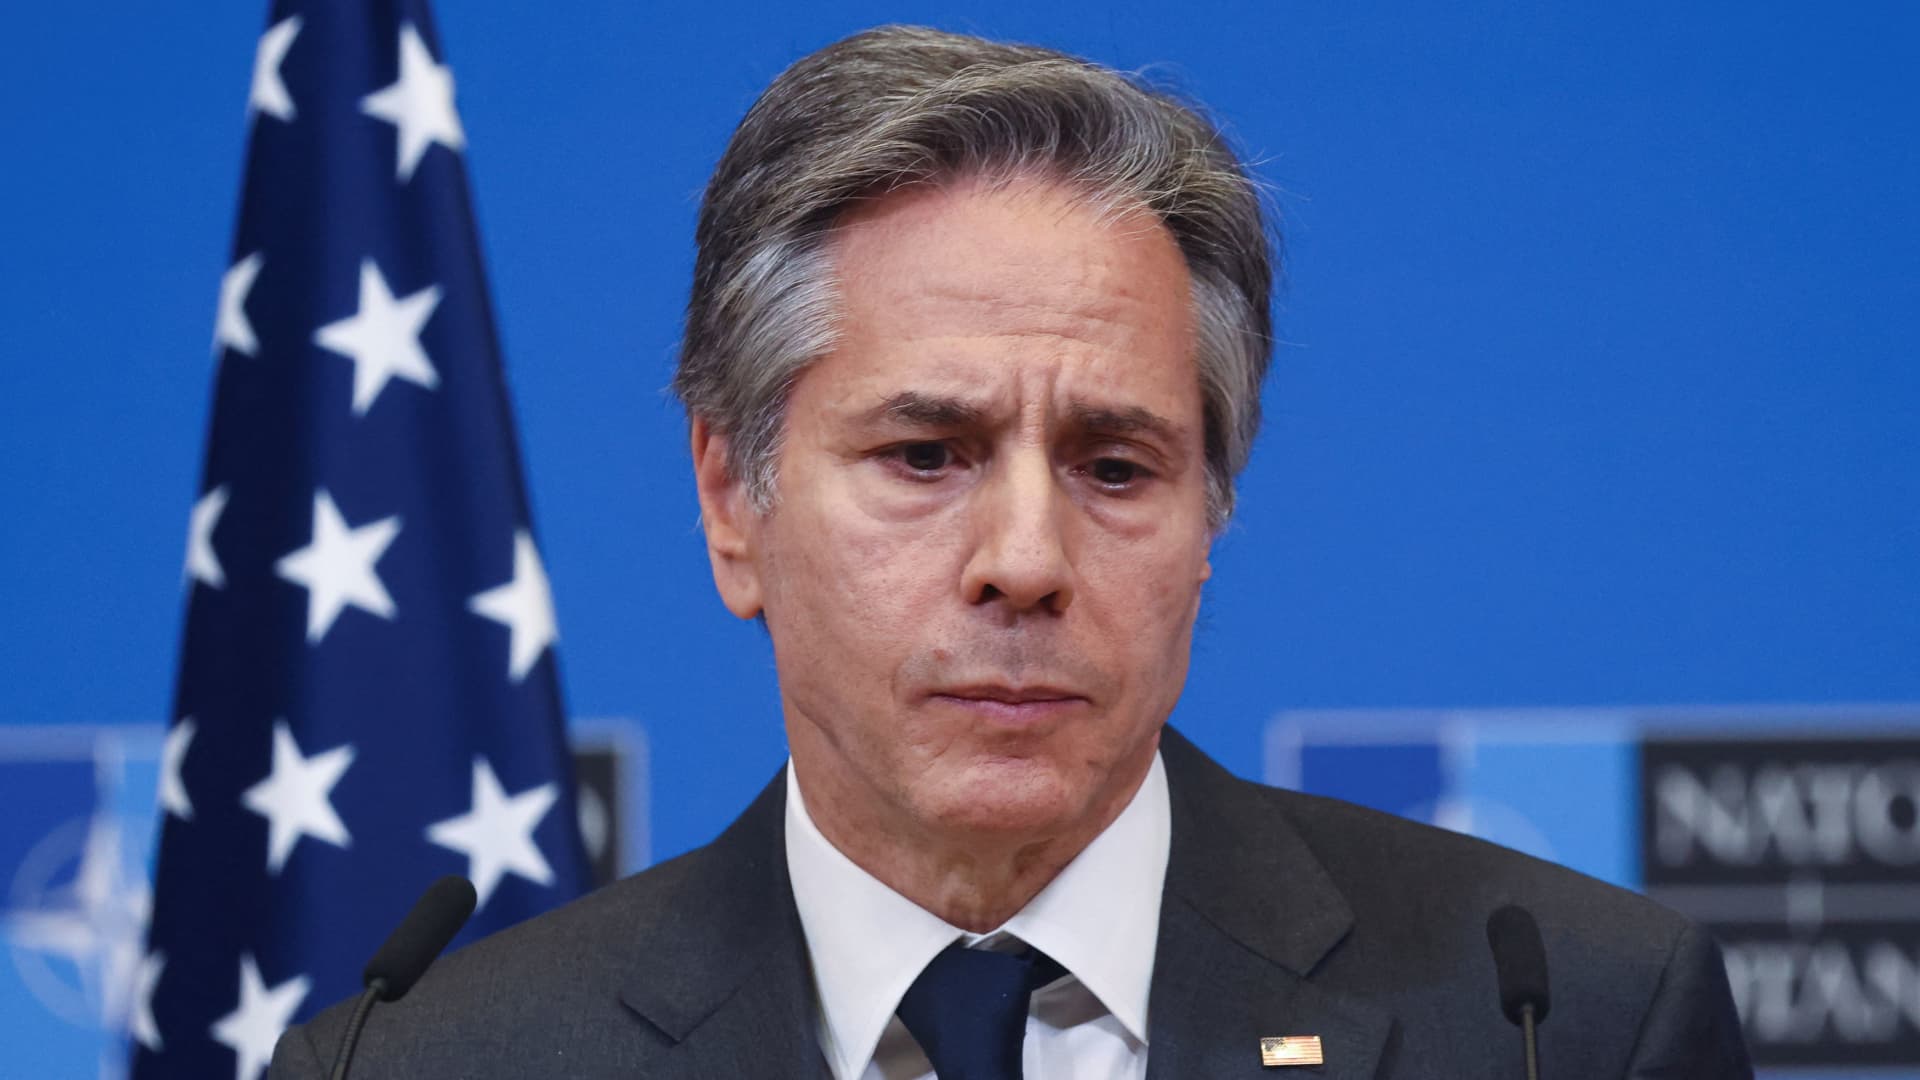 U.S. Secretary of State Antony Blinken looks on while speaking to the media after a NATO foreign ministers meeting, amid Russia's invasion of Ukraine, at NATO headquarters in Brussels, Belgium April 7, 2022.